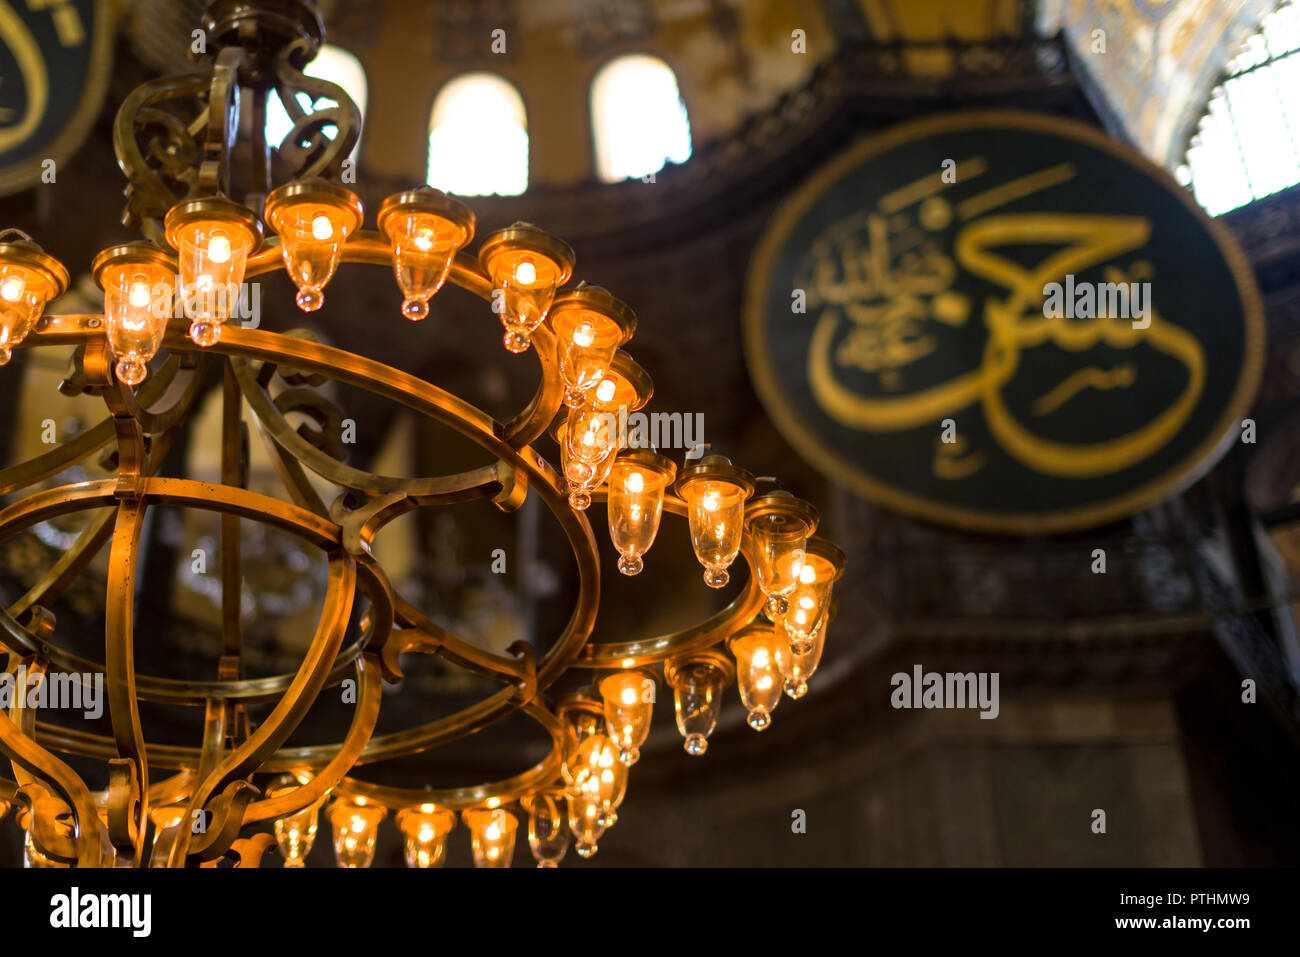 View of on of the chandaliers that light up the main nave interior of the Hagia Sophia museum with dome and calligraphic roundel in background, Istanb Stock Photo